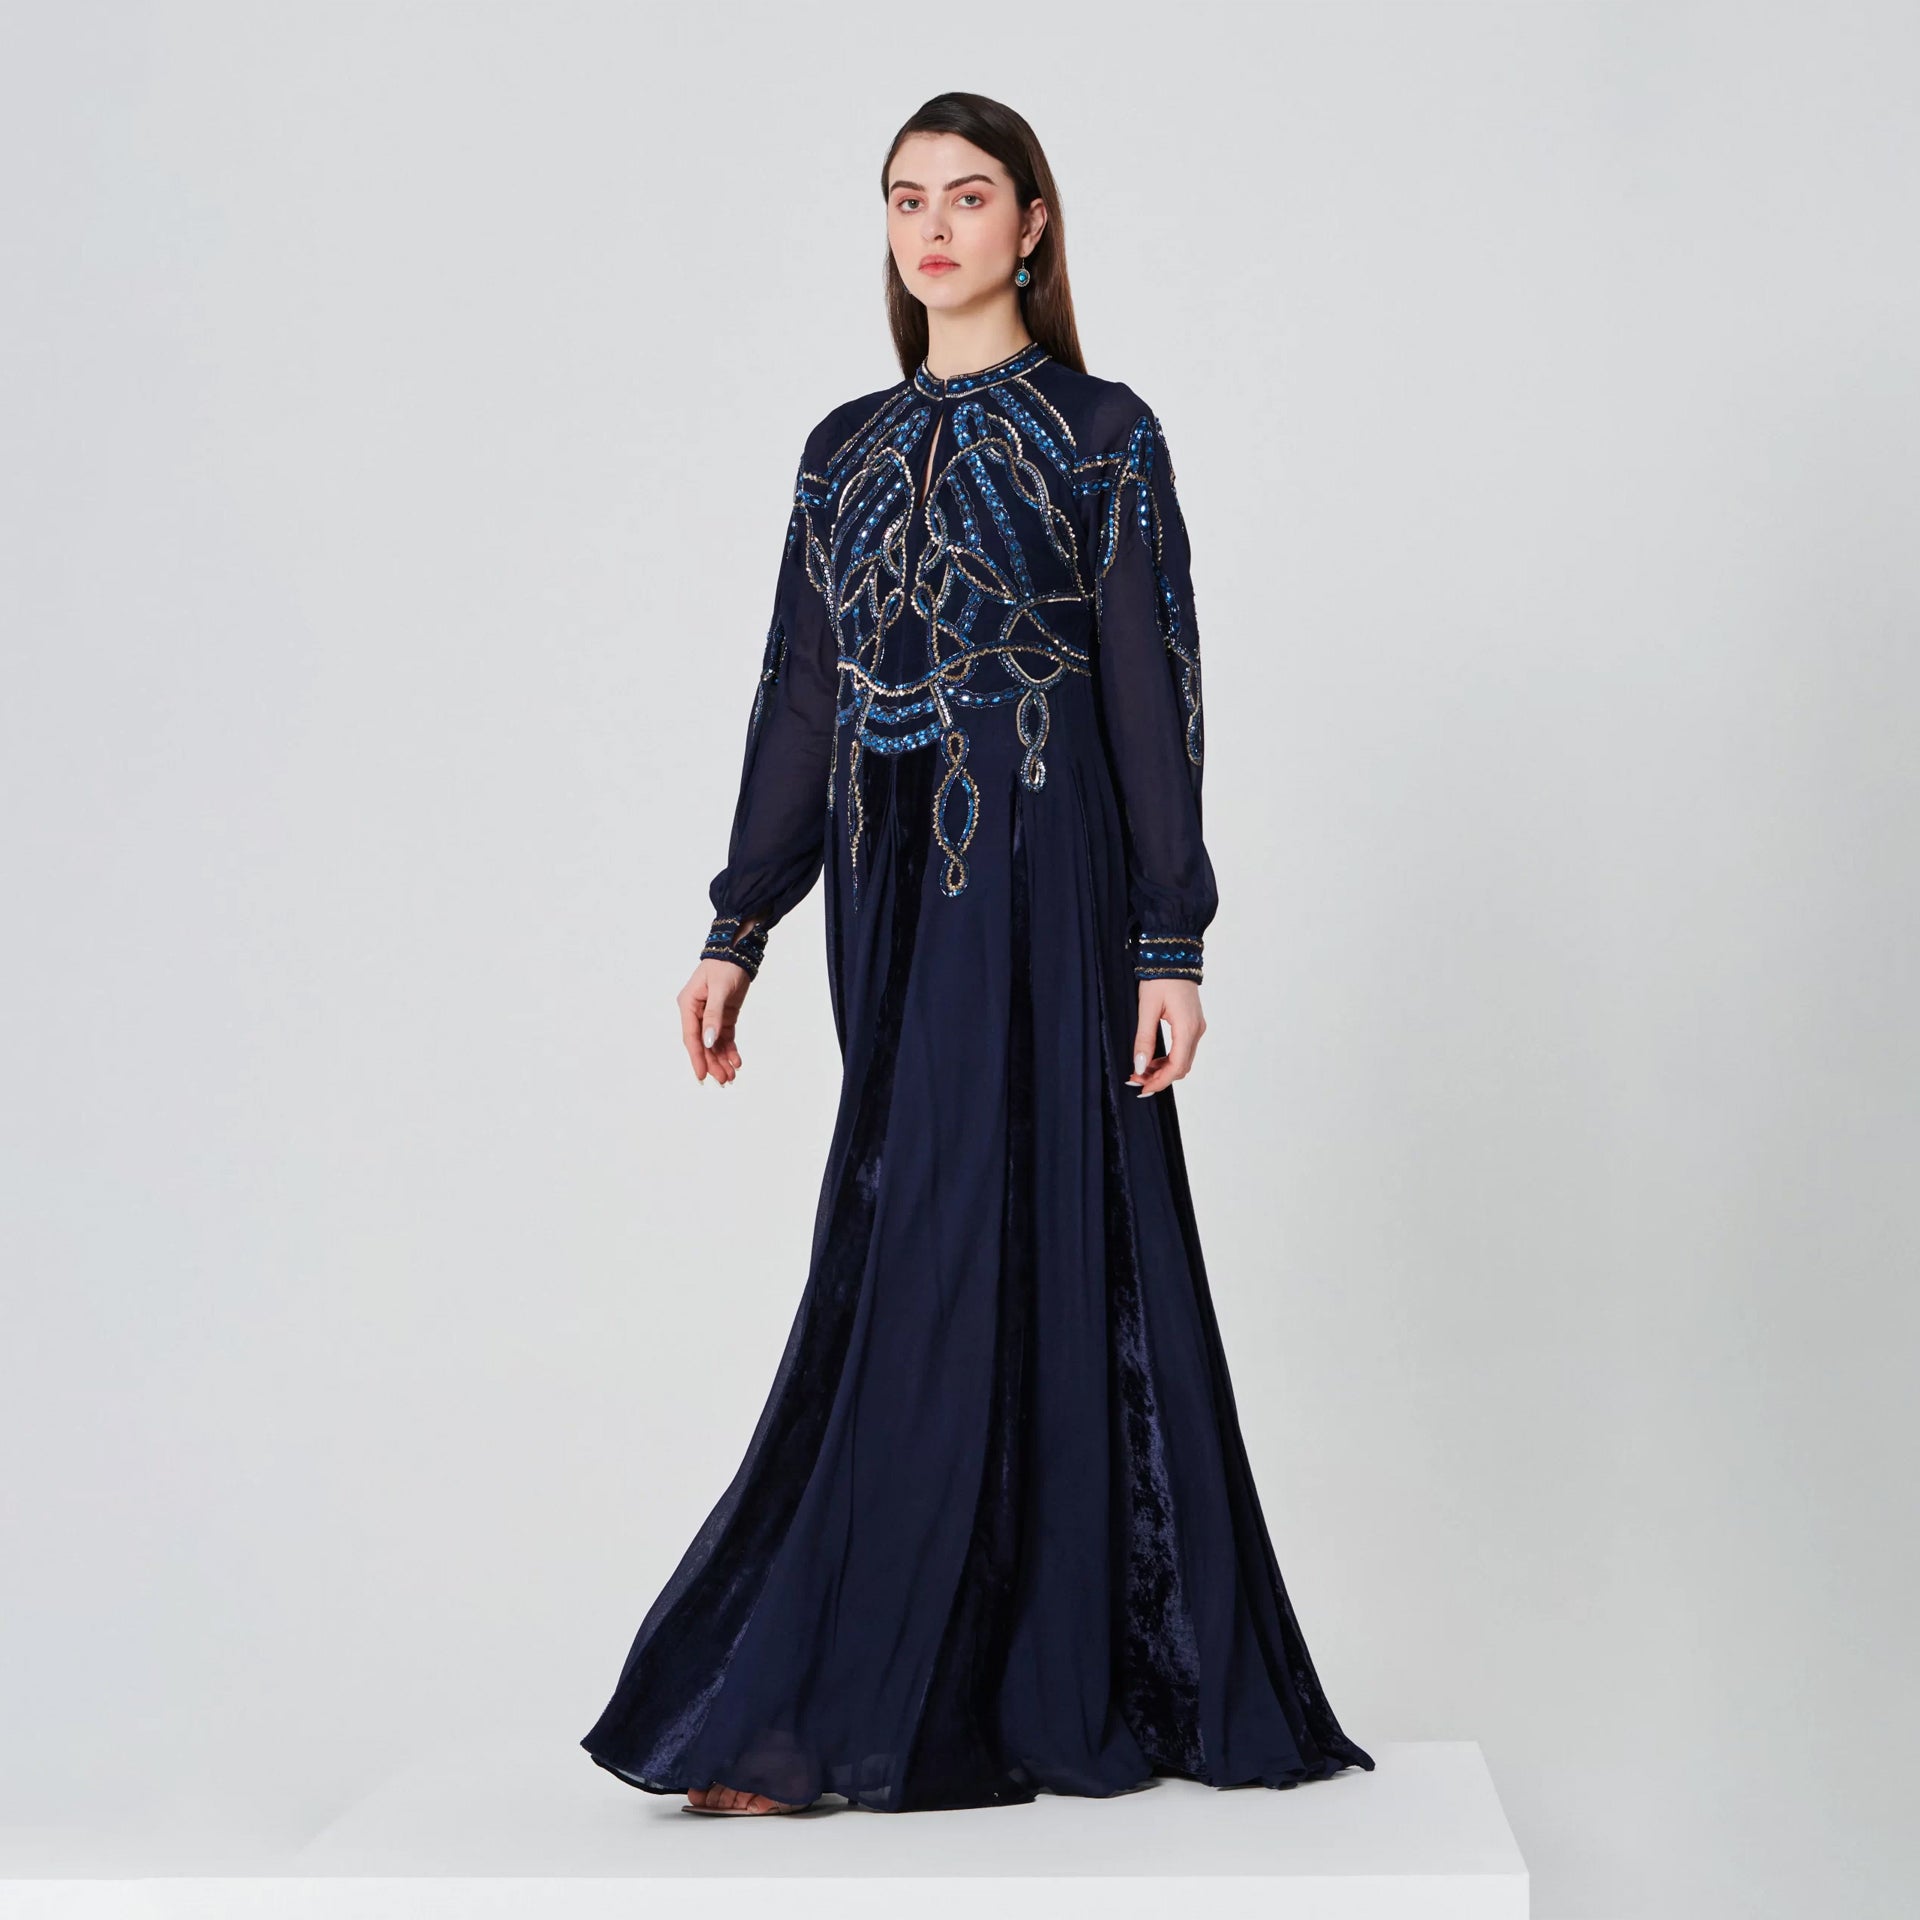 Navy Crepe Dress With Long Sleeves And Blue Embroidery From Shalky